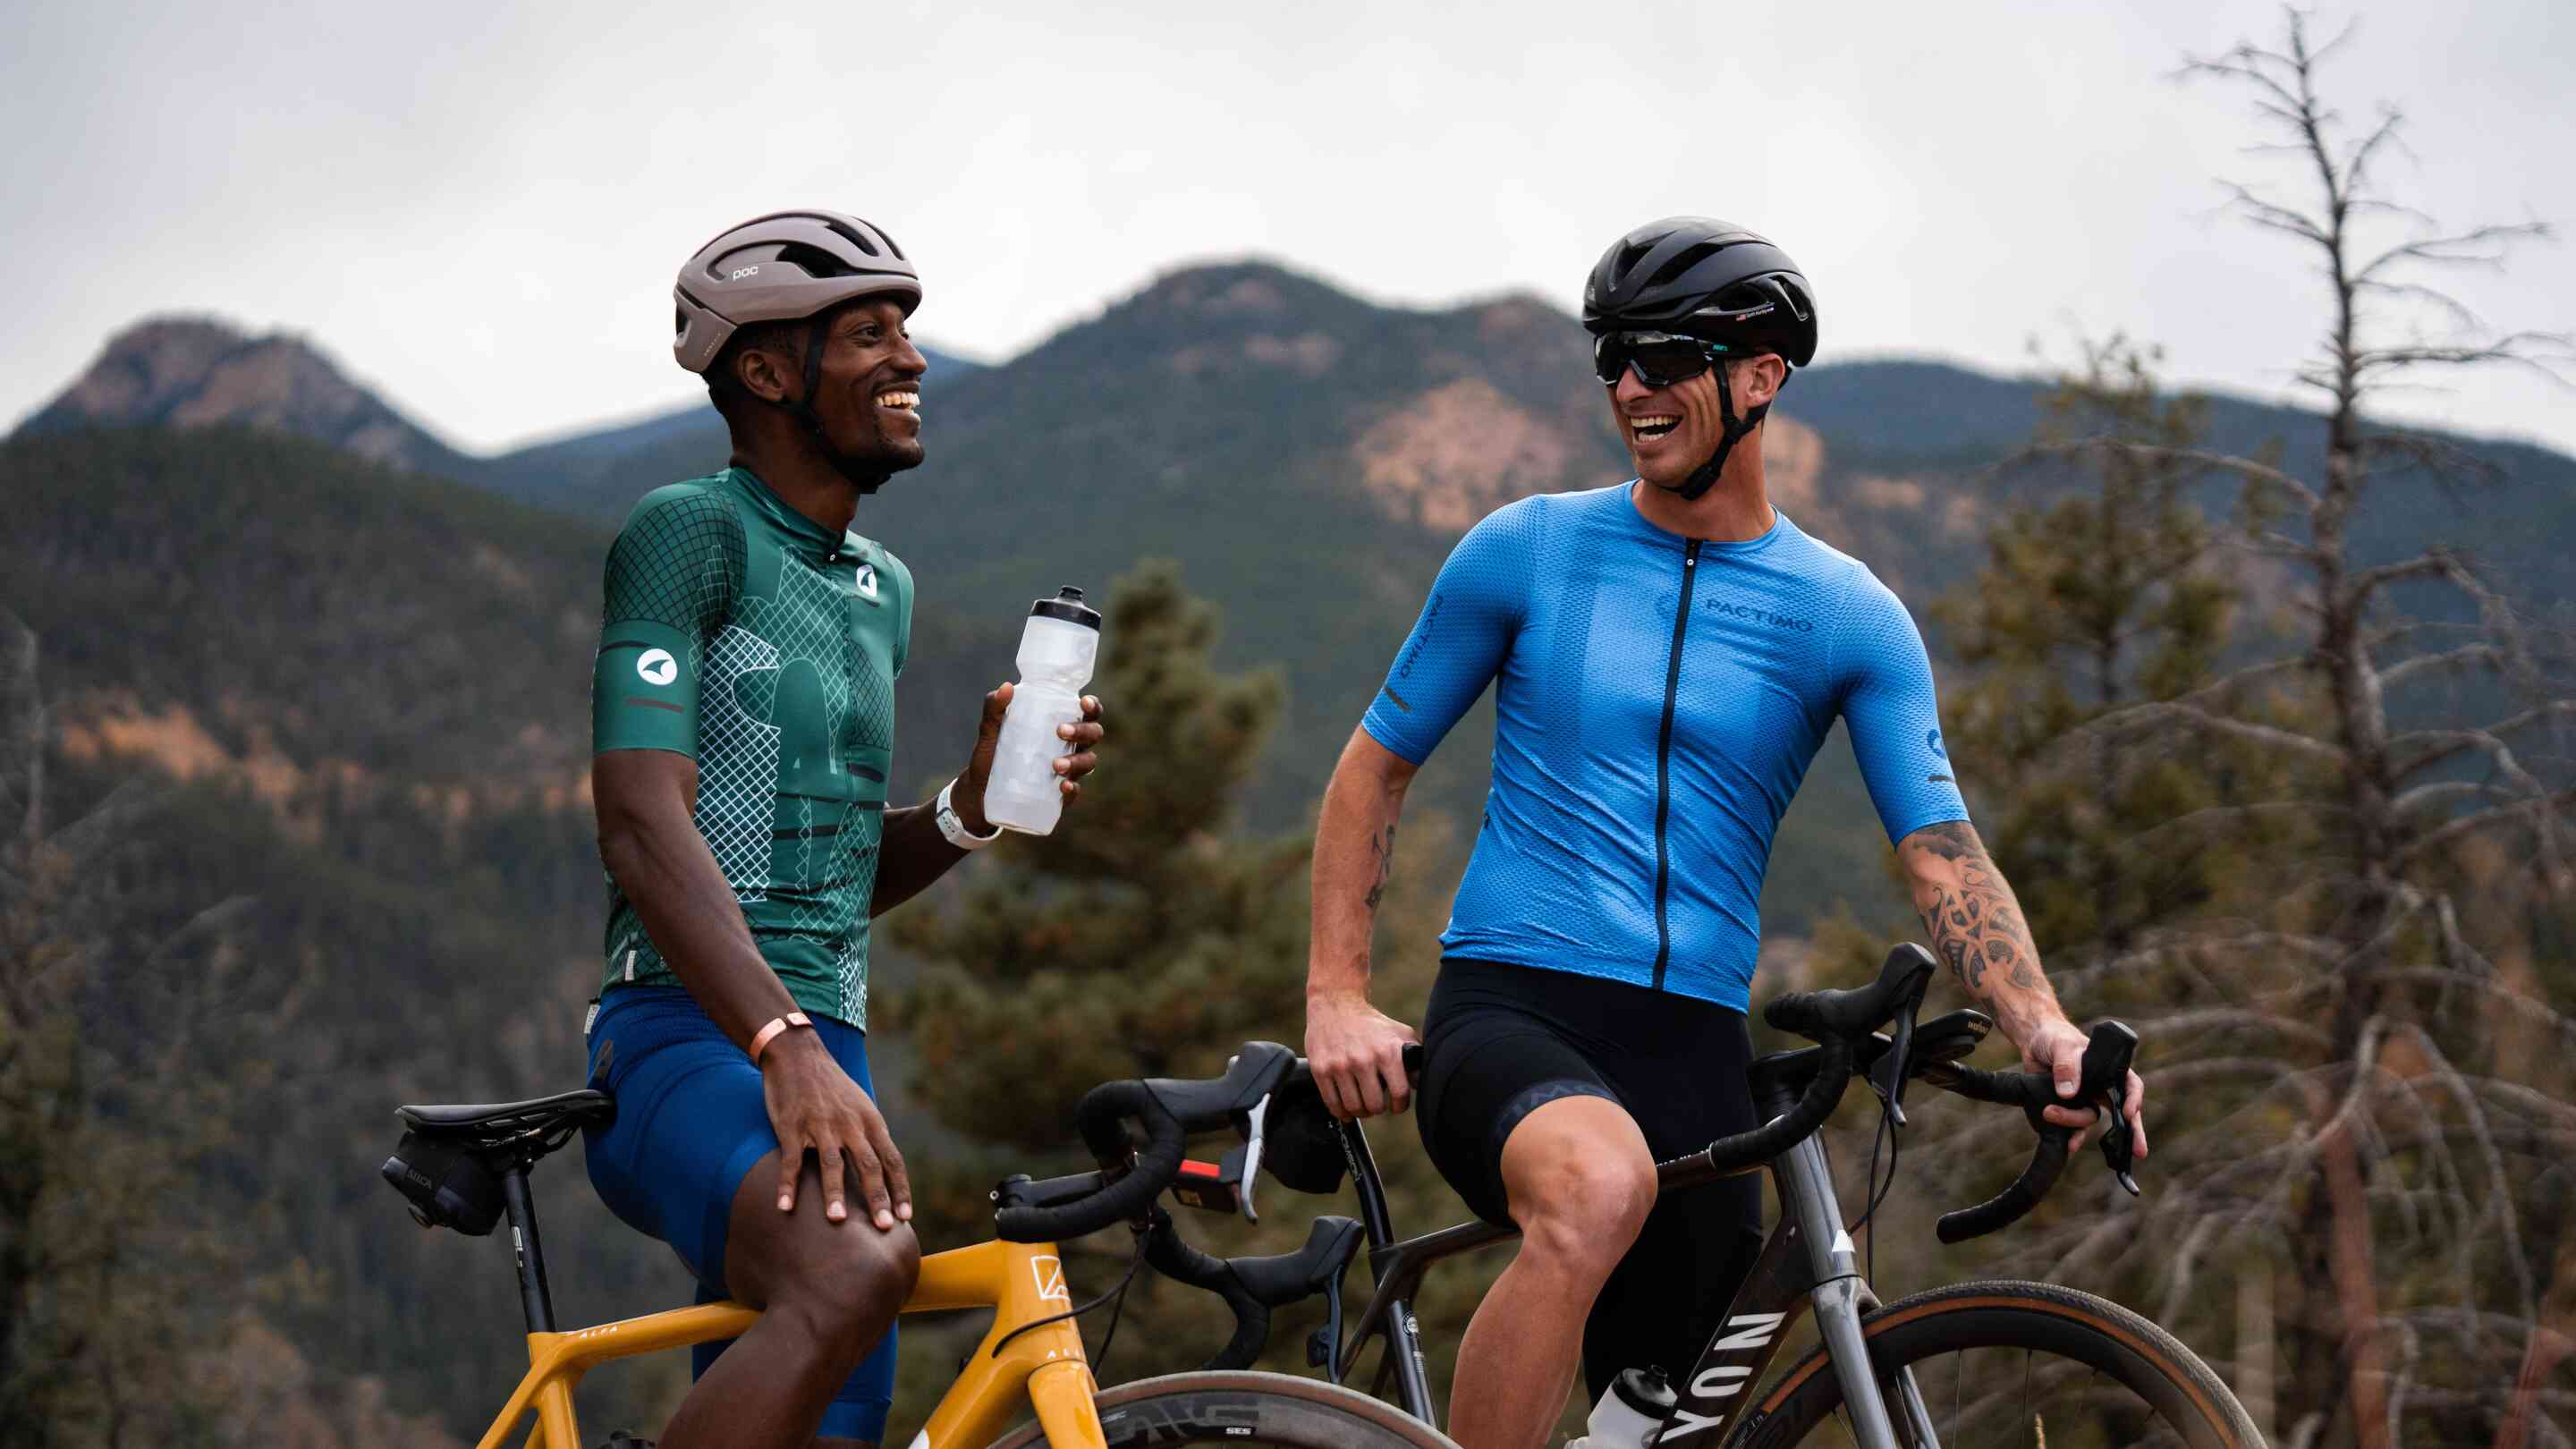 Pactimo Cycling Apparel - Refer a Friend Program